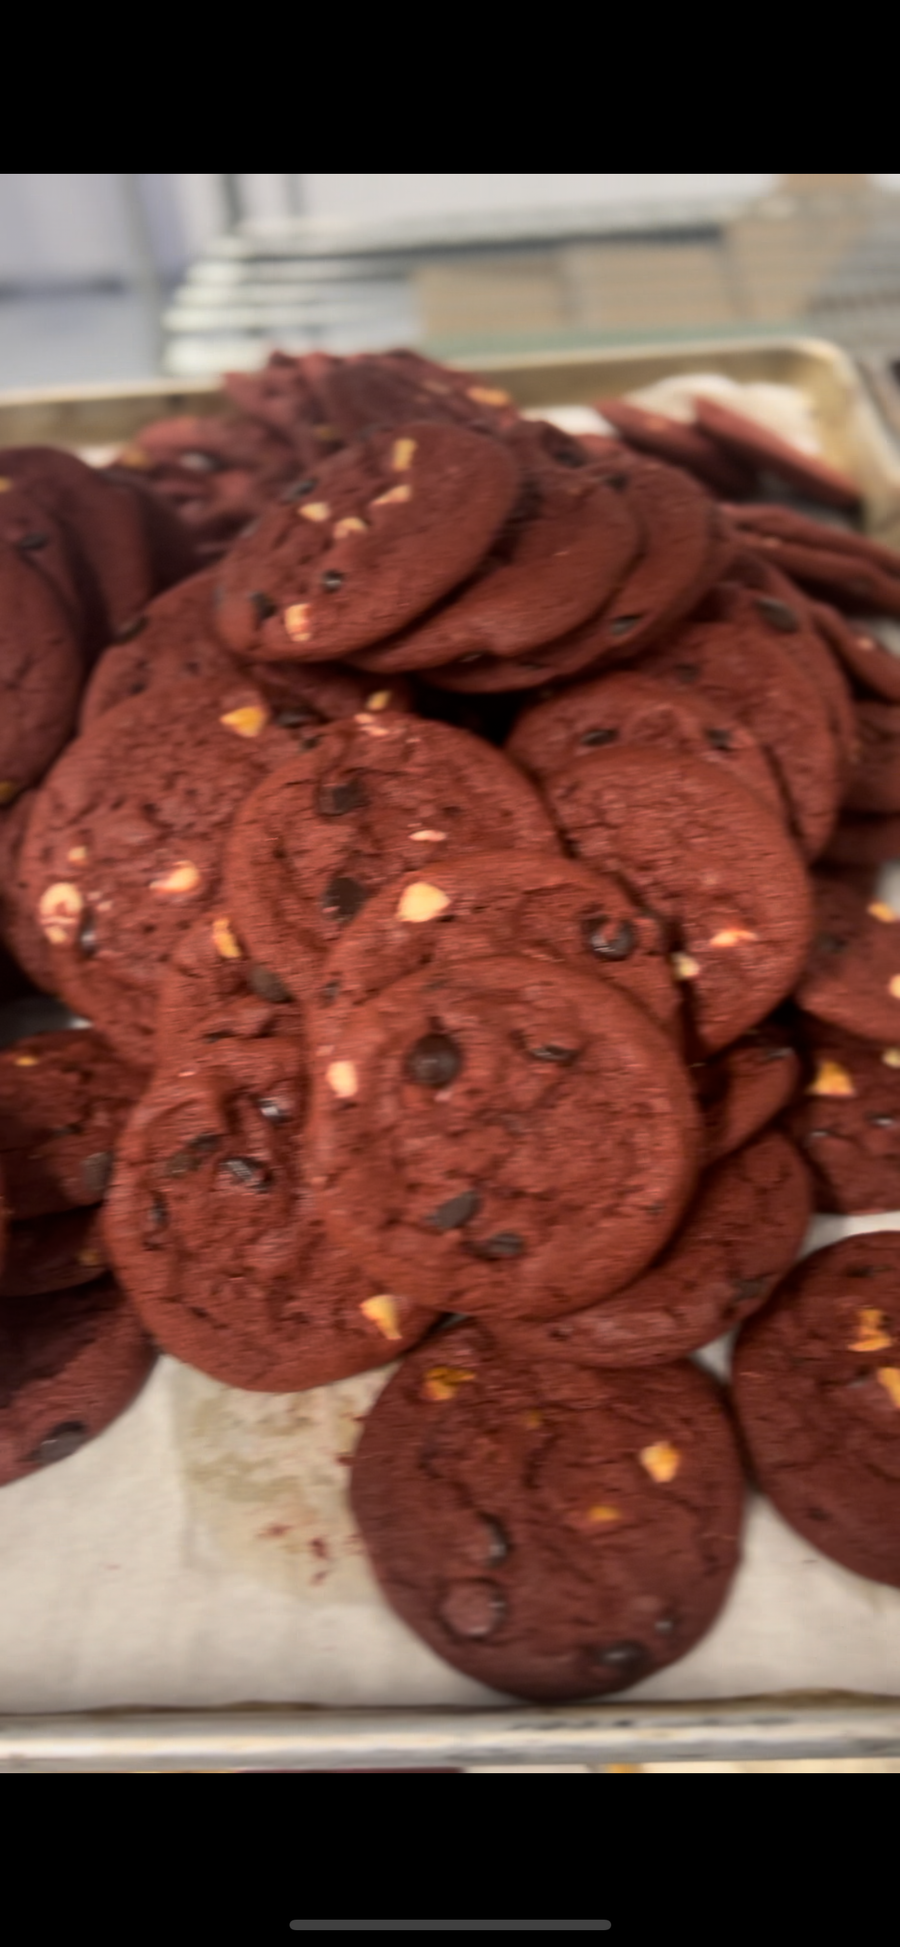 Red Velvet cookies with white chocolate chips and chocolate chips